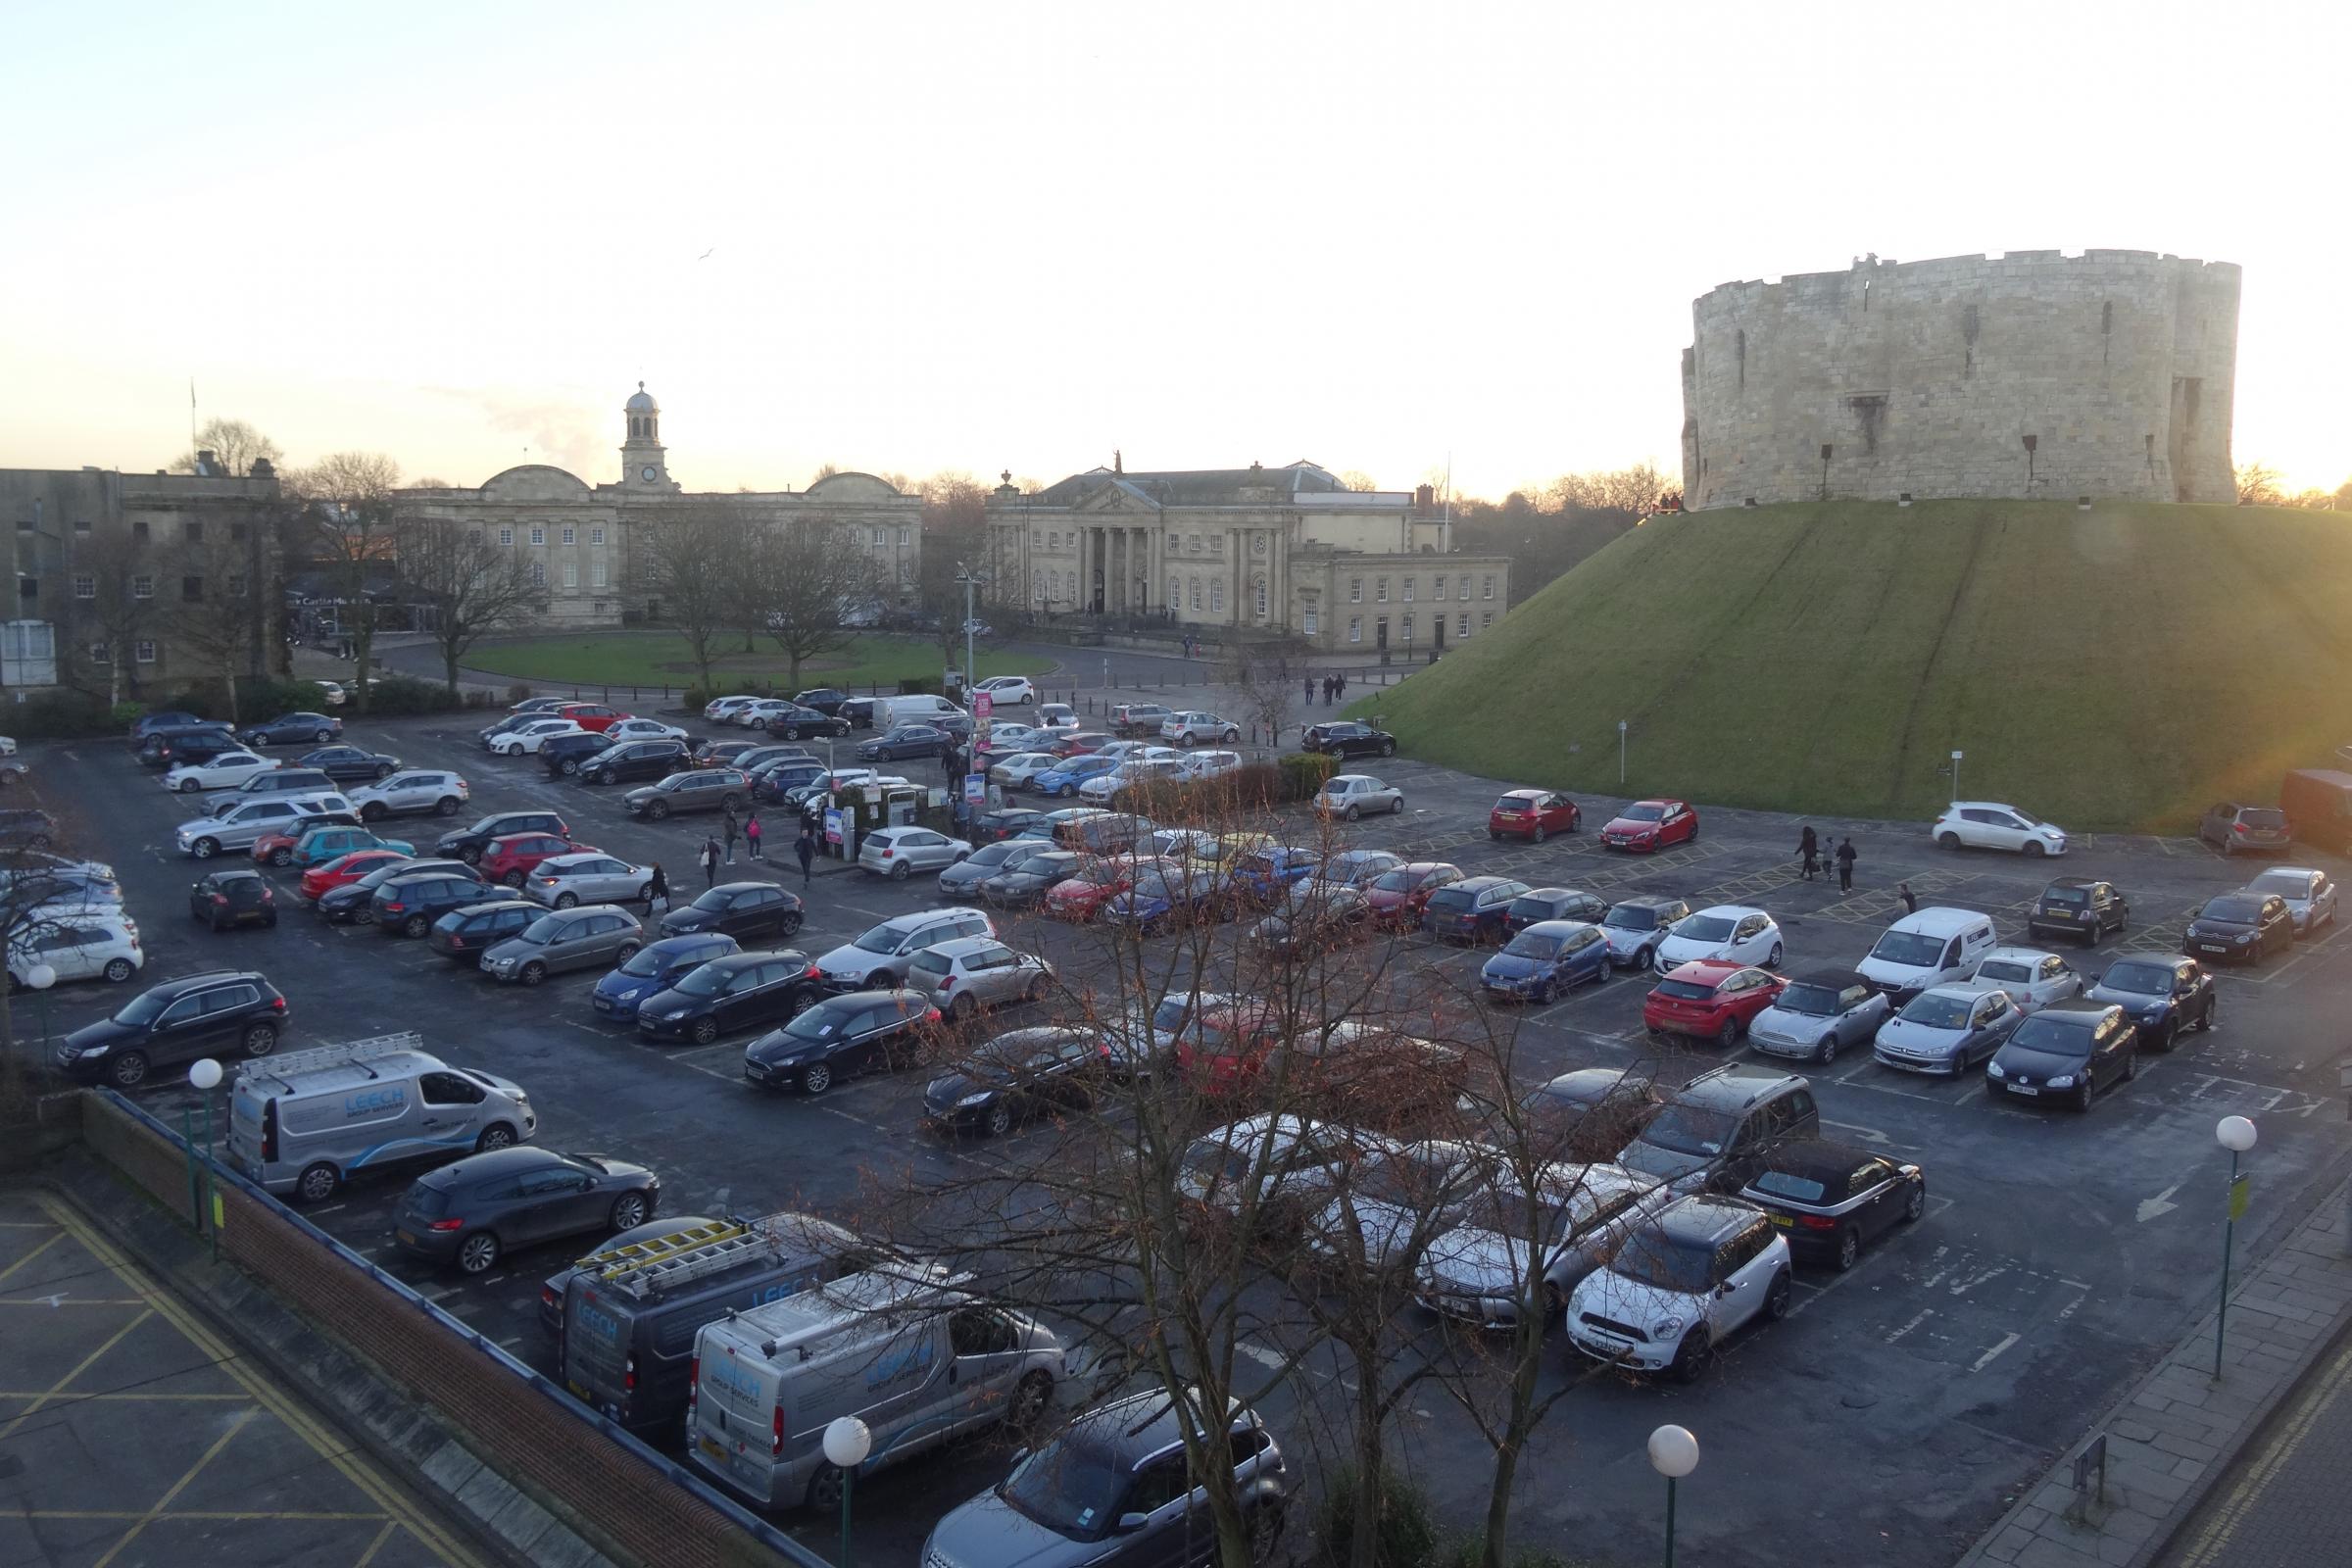 New city vision should prompt Clifford's Tower rethink, says councillor